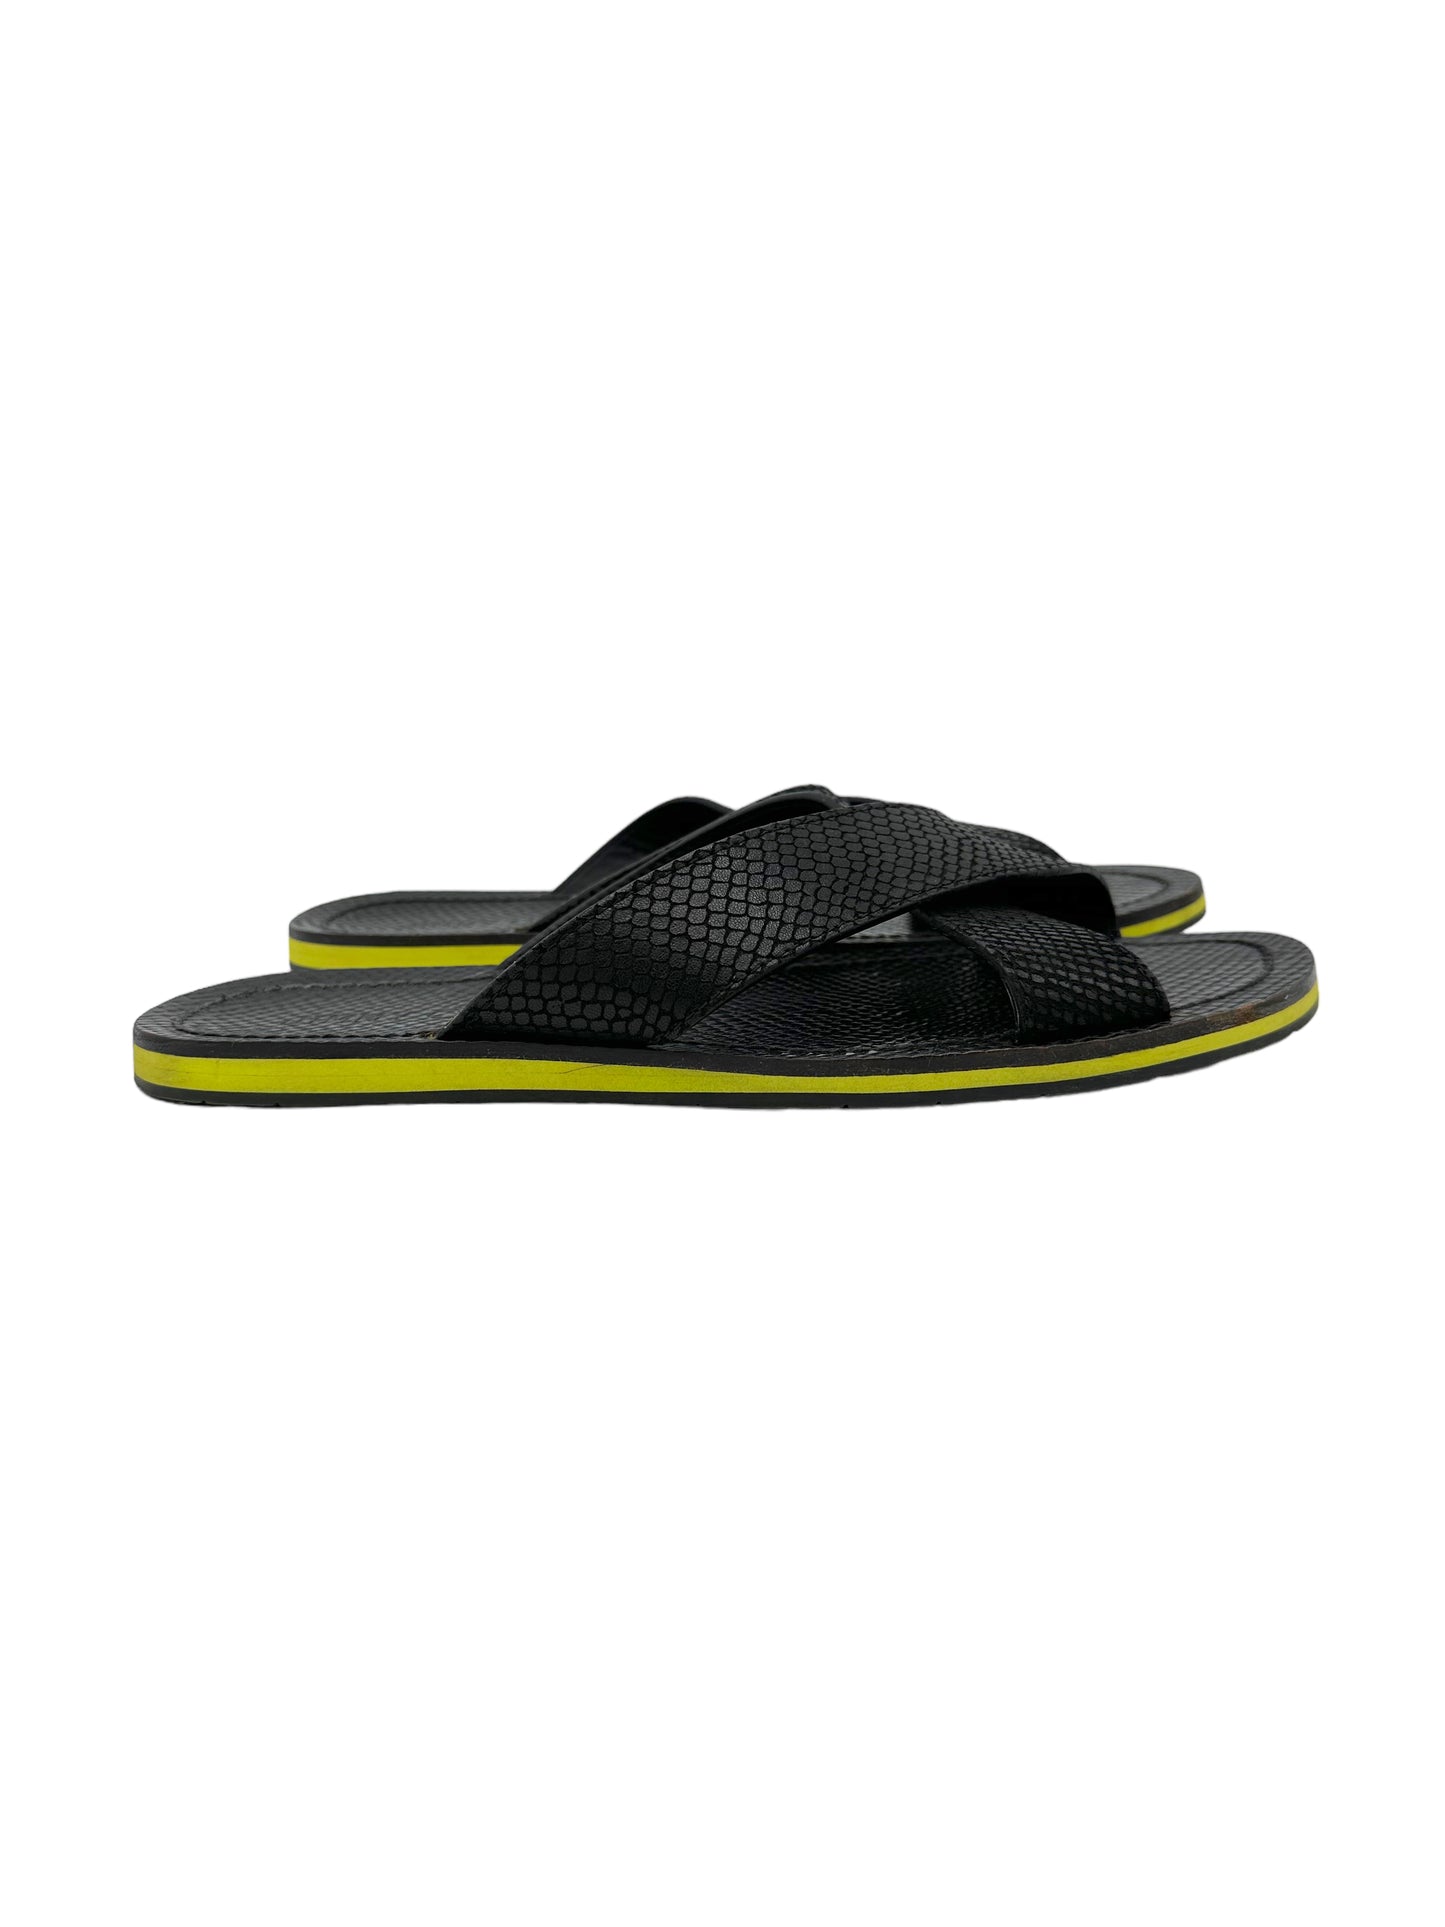 Jimmy Choo Black & Yellow Sandal - Genuine Design Luxury Consignment for Men. New & Pre-Owned Clothing, Shoes, & Accessories. Calgary, Canada